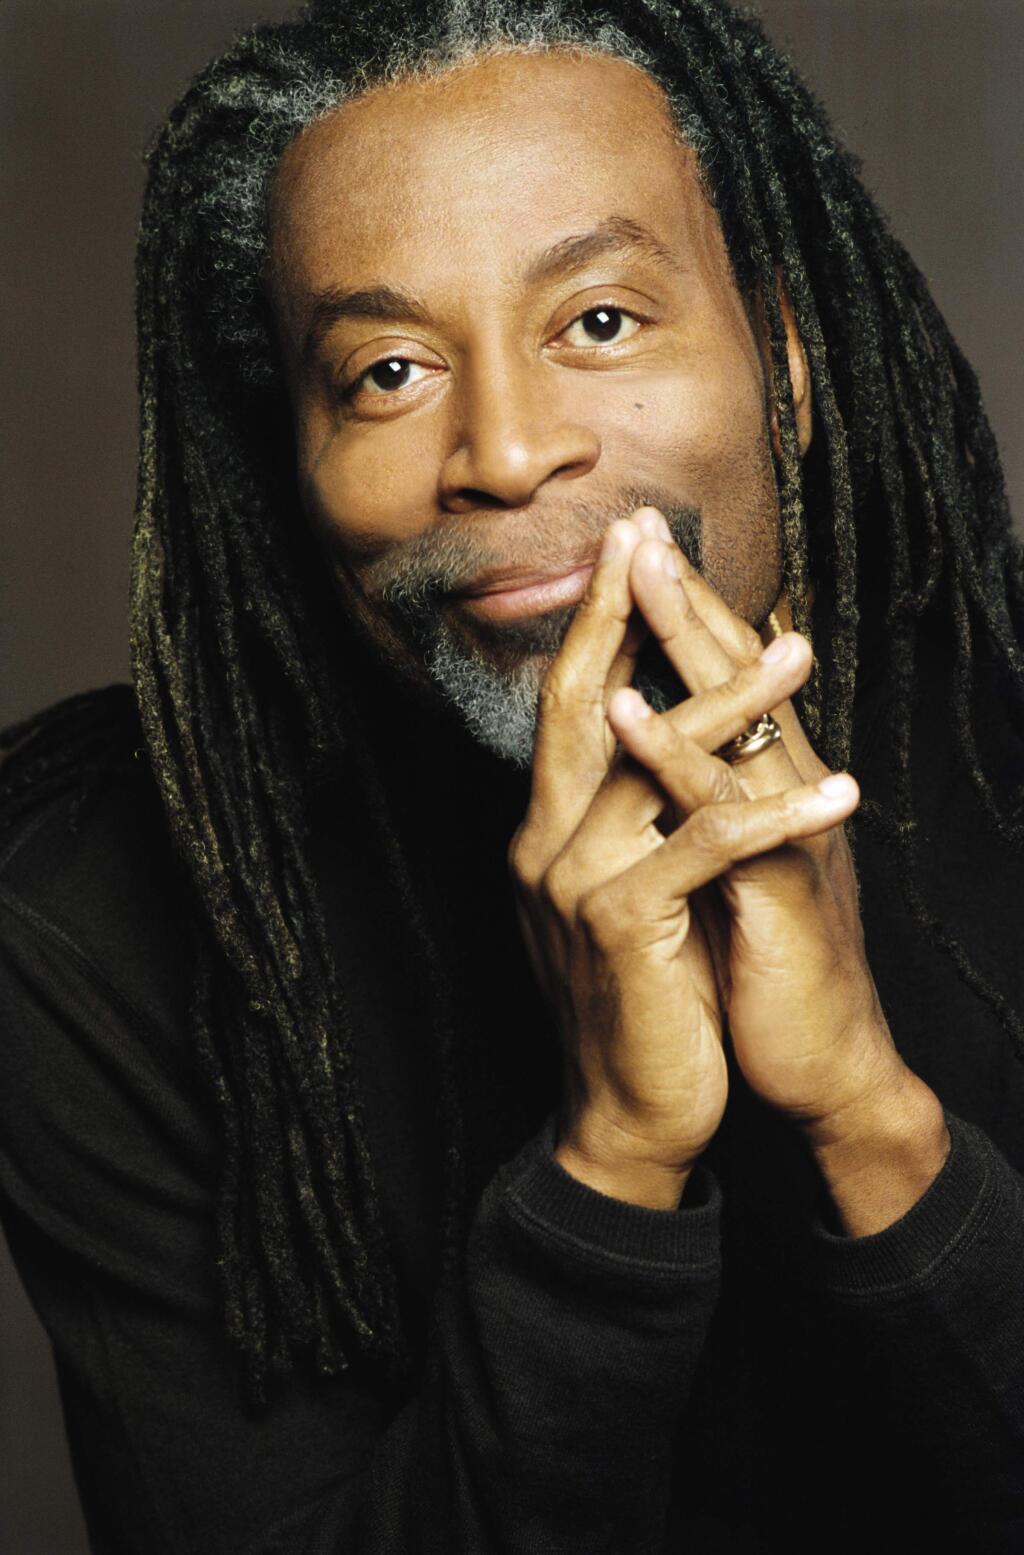 Bobby McFerrin, composer and vocalist known for his unique singing style that includes scat singing, polyphonic overtone singing, is a 10-time Grammy winner. (CAROL FRIEDMAN)